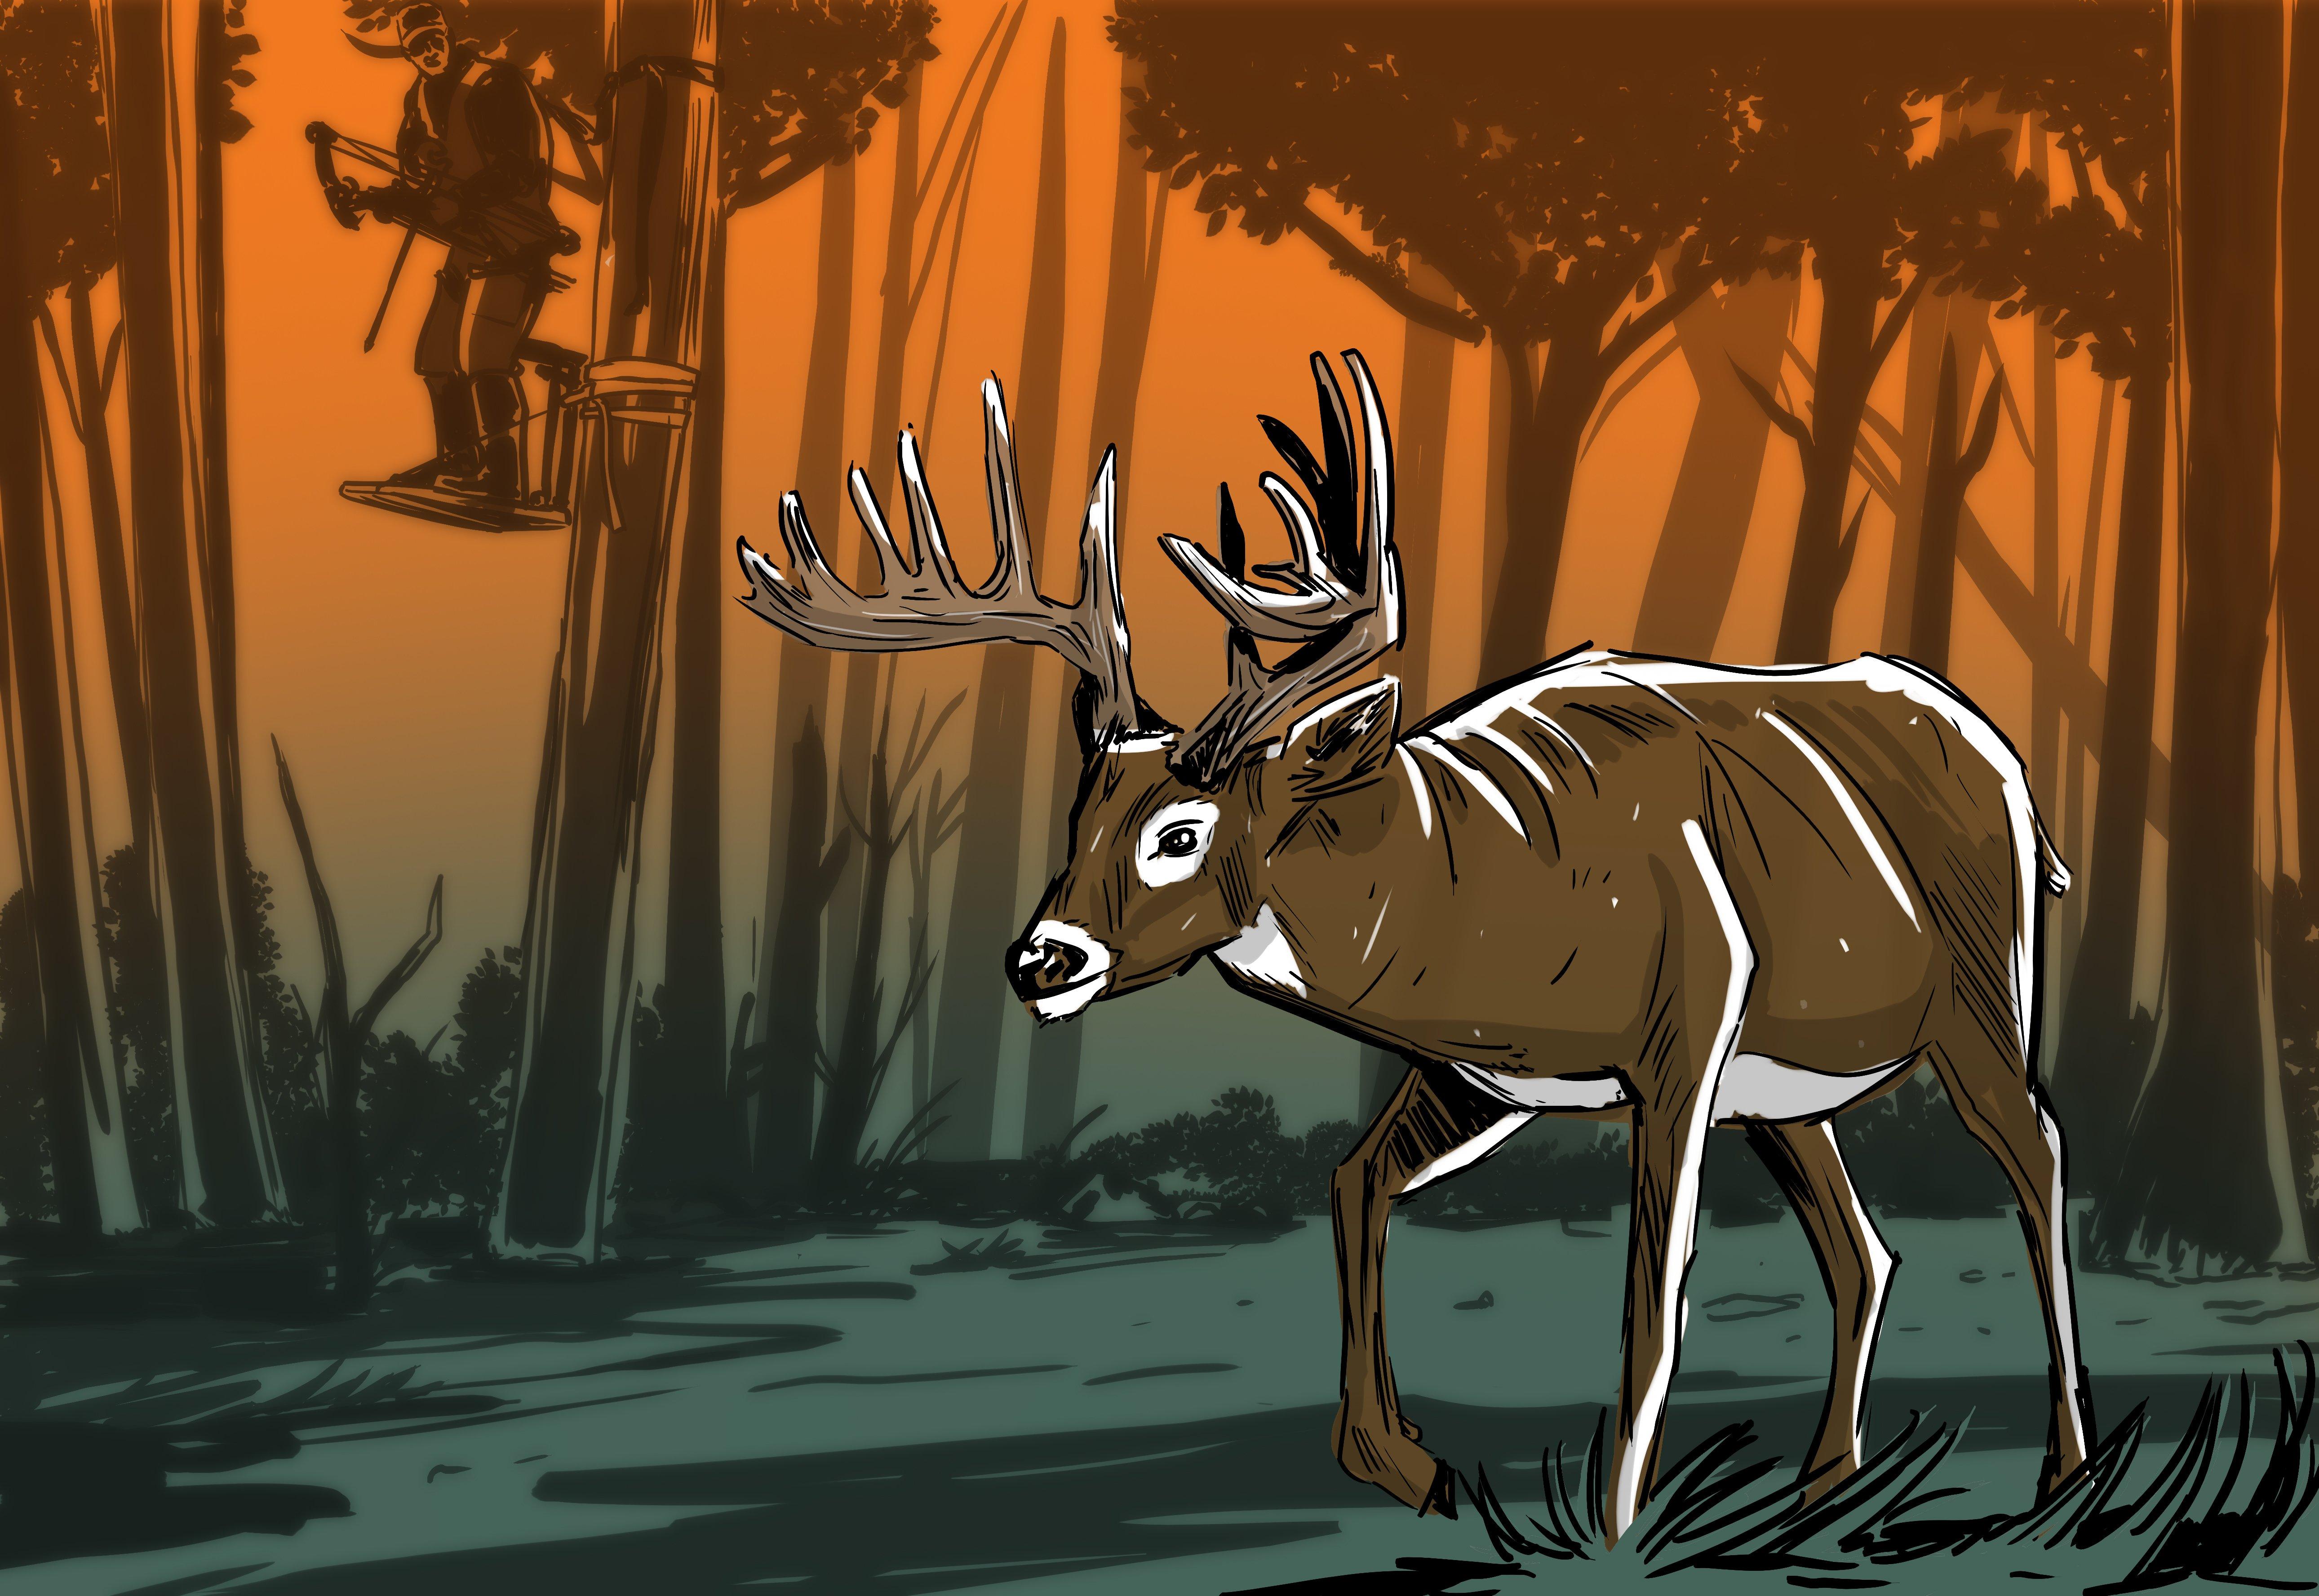 5 great setups for pre-rut bowhunting. Illustration by Ryan Orndorff